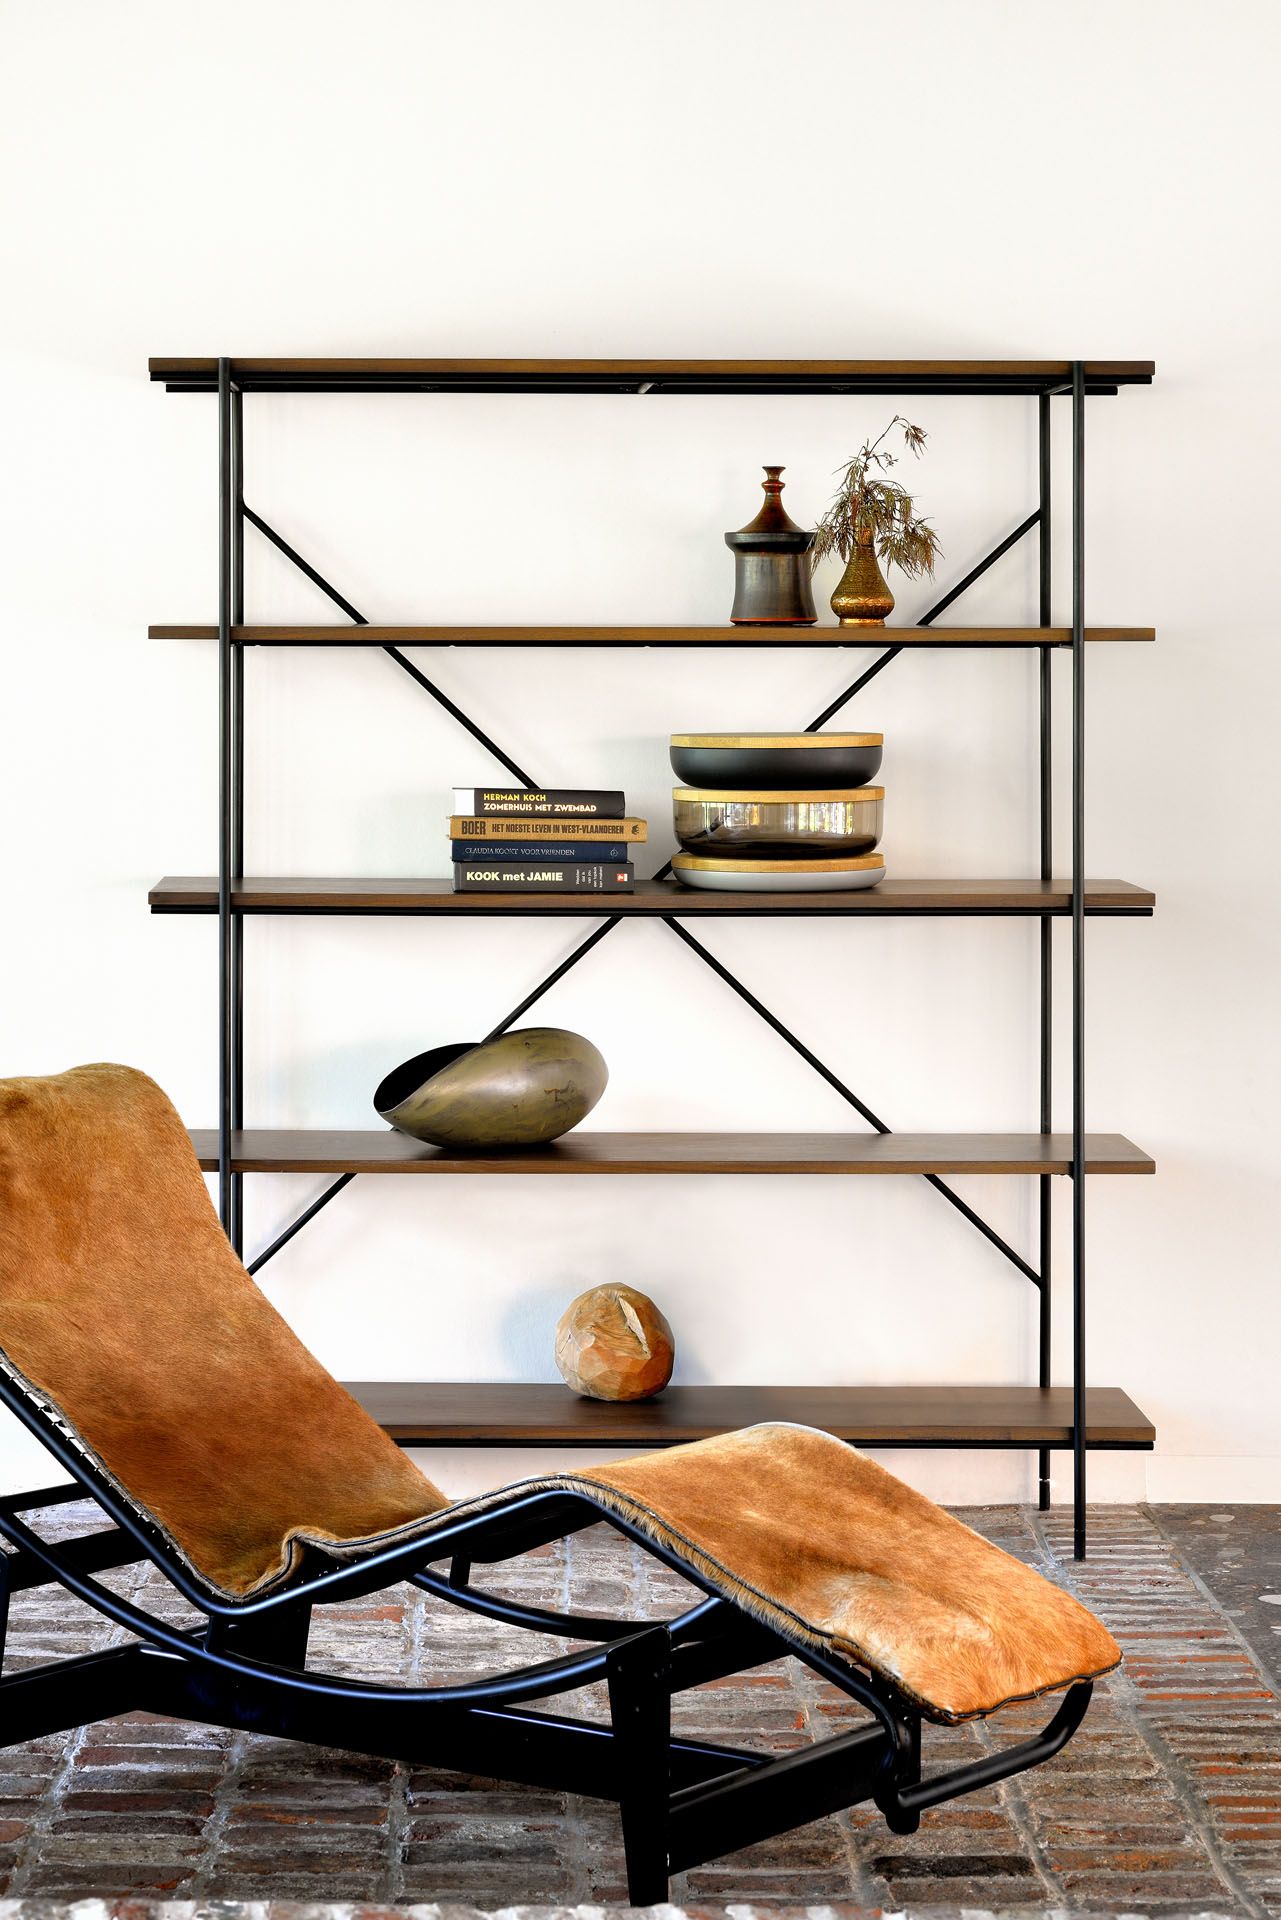 Ethnicraft Oak Rise Rack Bookcase available from Make Your House A Home, Bendigo, Victoria, Australia